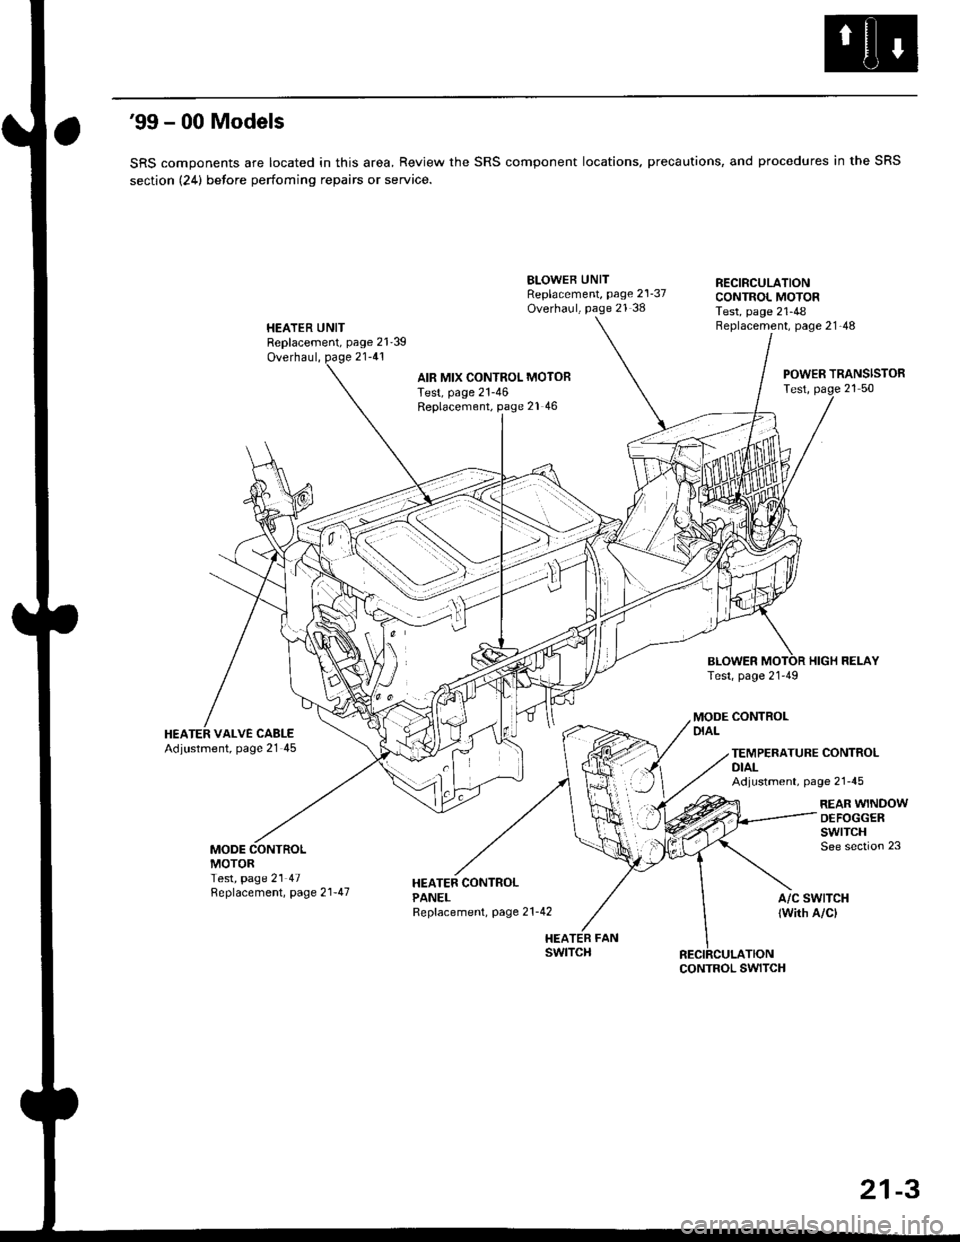 HONDA CIVIC 1998 6.G Workshop Manual 99 - 00 Models
SRS components are located in this area, Review the SRS component locations, precautions, and procedures in the SRS
section (24) betore perfoming repairs or service.
HEATER UNITReplace